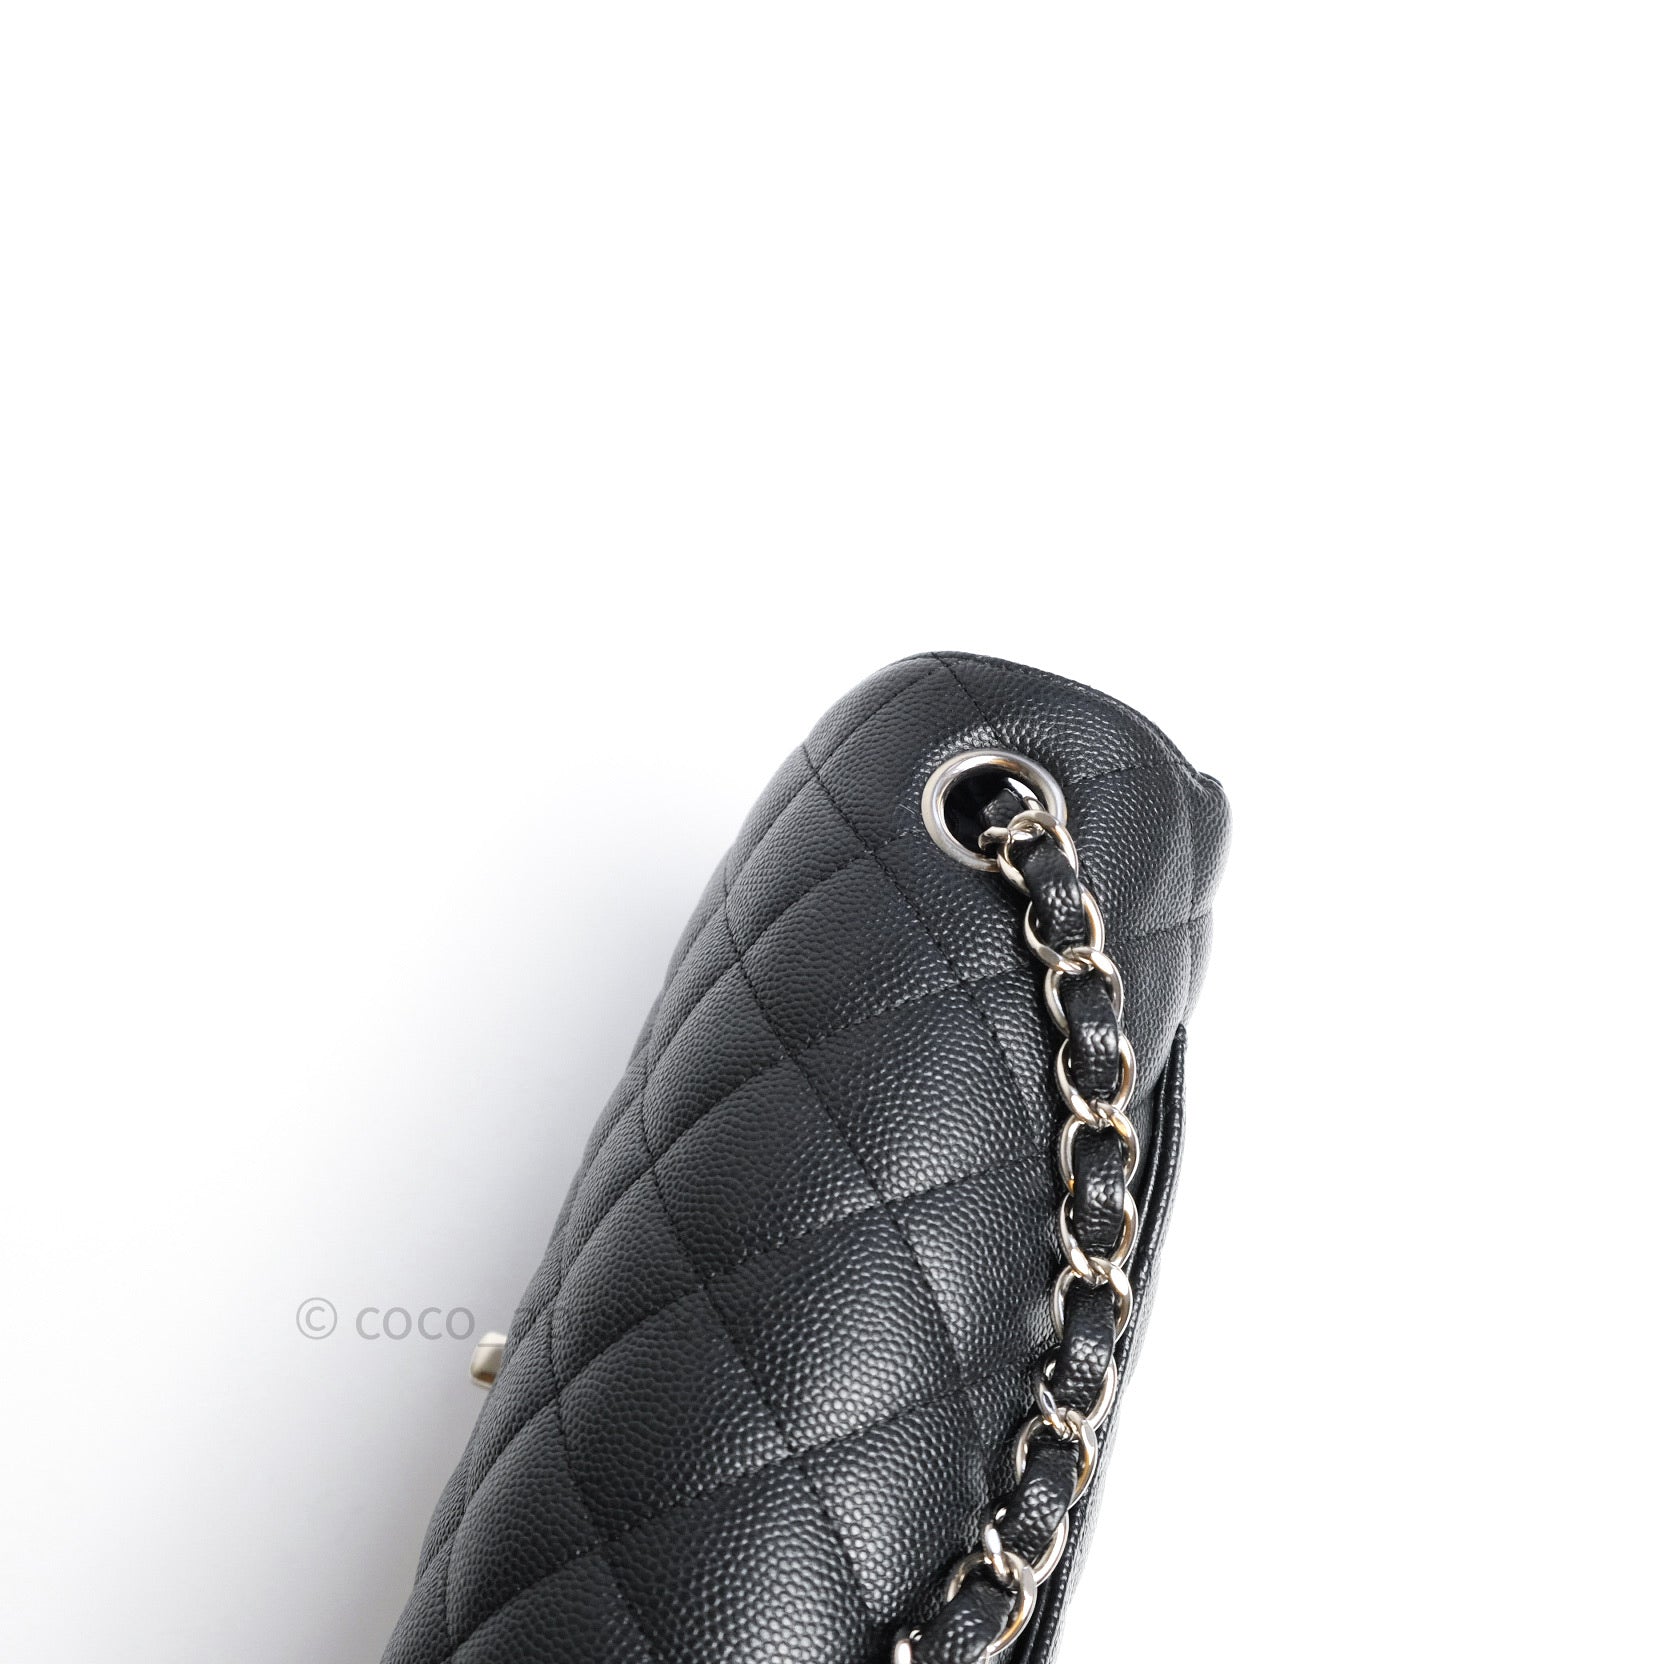 Chanel Maxi Black Quilted Lambskin Classic Double Flap Bag 100